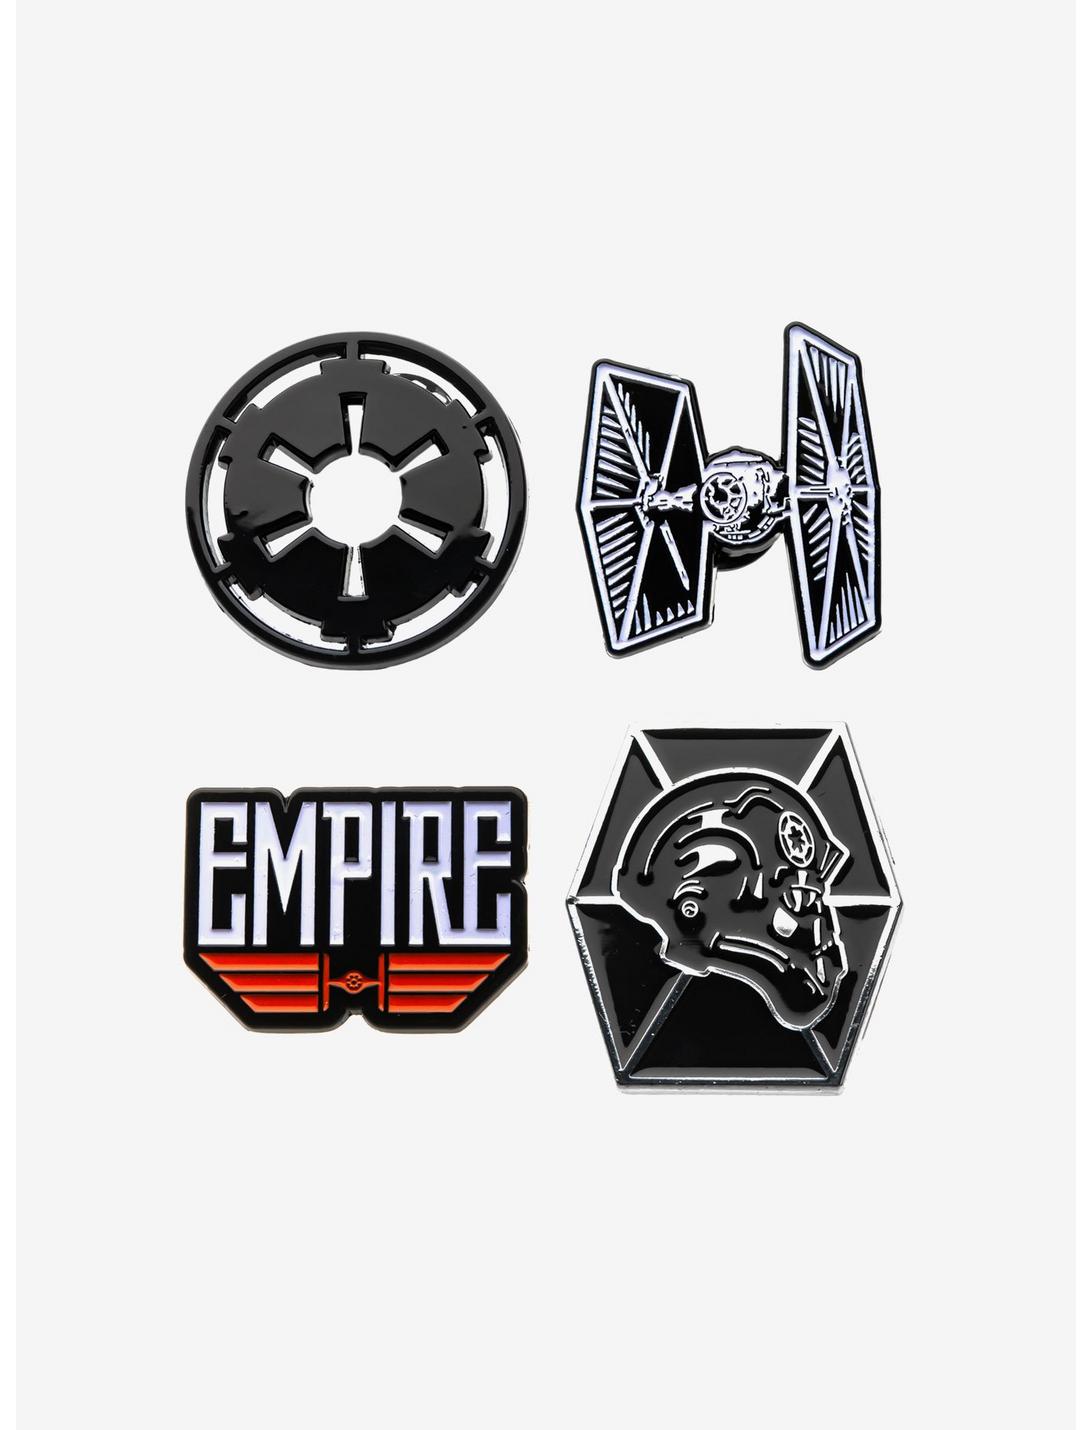 Star Wars Imperial Galactic Empire and Tie Fighter Enamel Pin Set, , hi-res